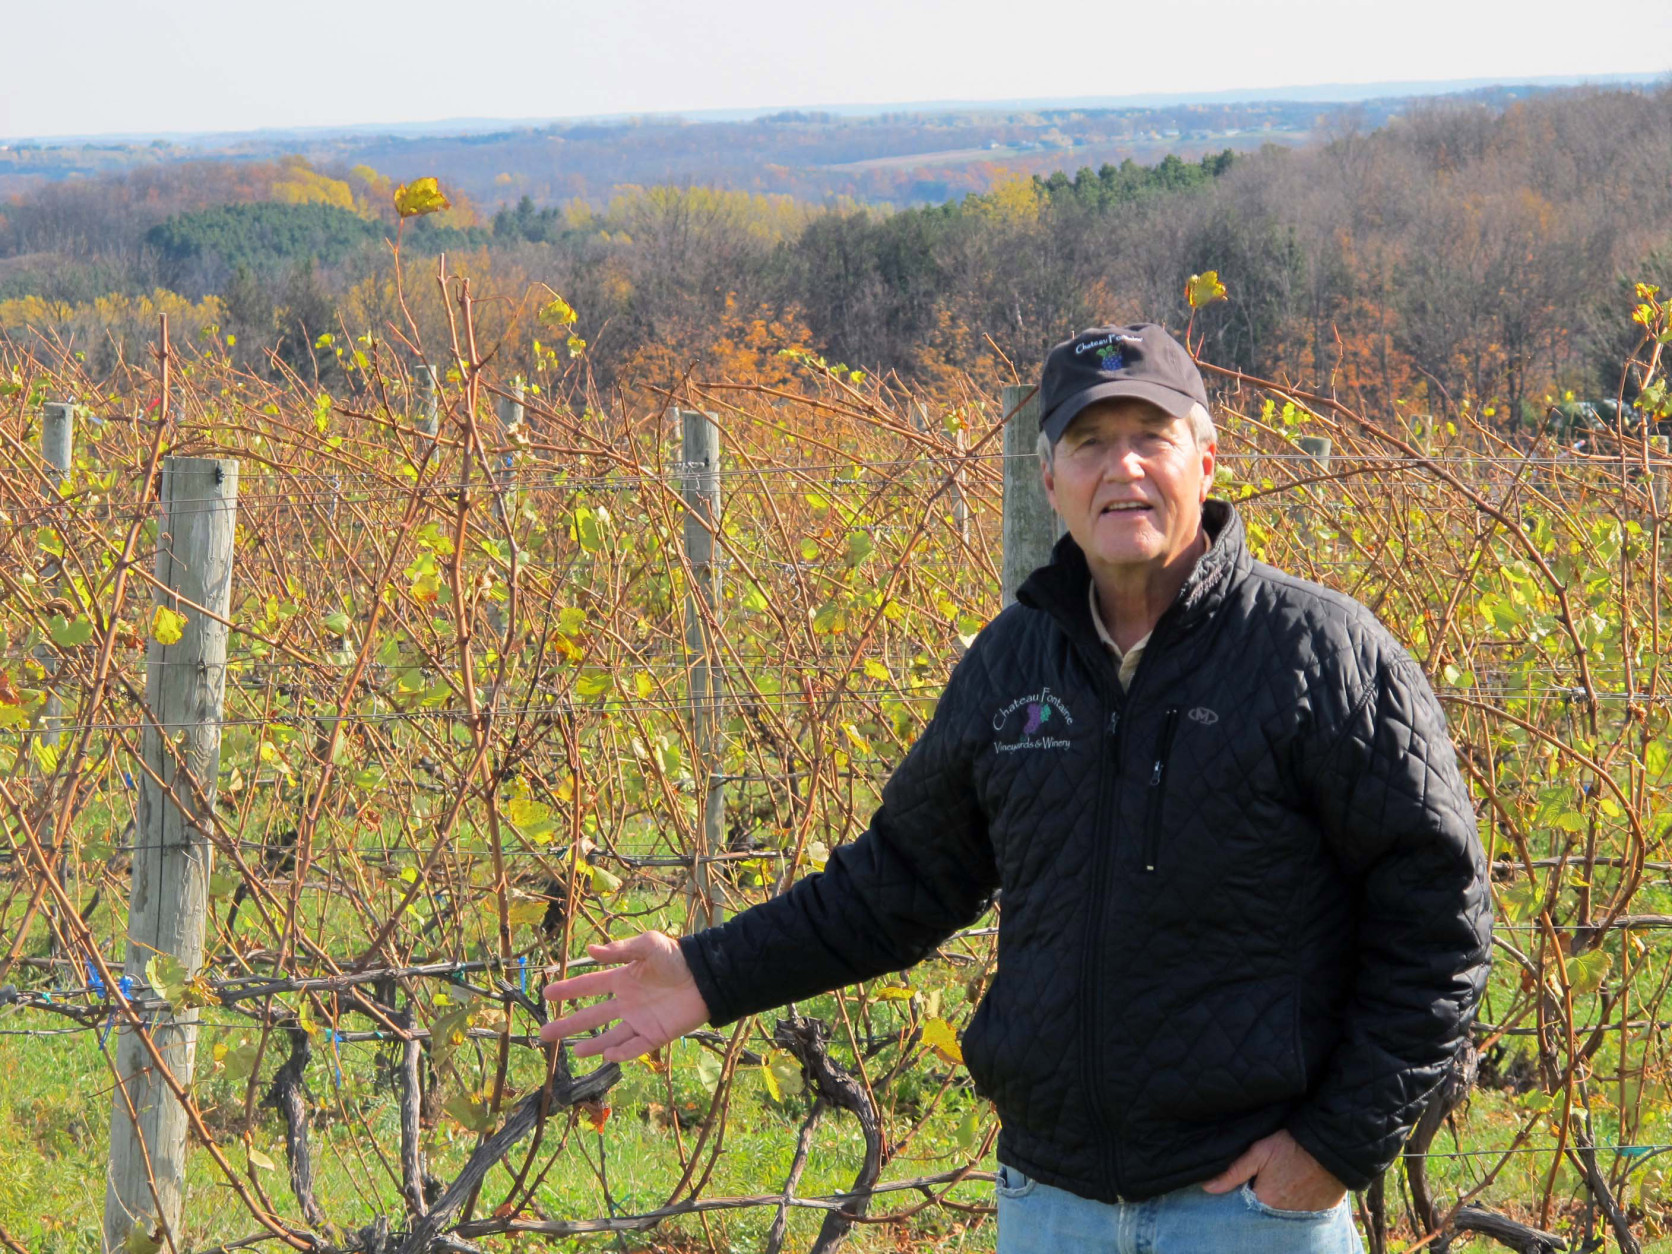 In this Nov. 4, 2011 photo, Dan Matthies, owner of Chateau Fontaine winery on Michigan's Leelanau Peninsula, stands beside one of his vineyards. Vineyards are springing up rapidly in Michigan, where fertile hillsides near the Great Lakes provide ideal settings for cool-weather varieties such as pinot grigio and chardonnay. (AP Photo/John Flesher)